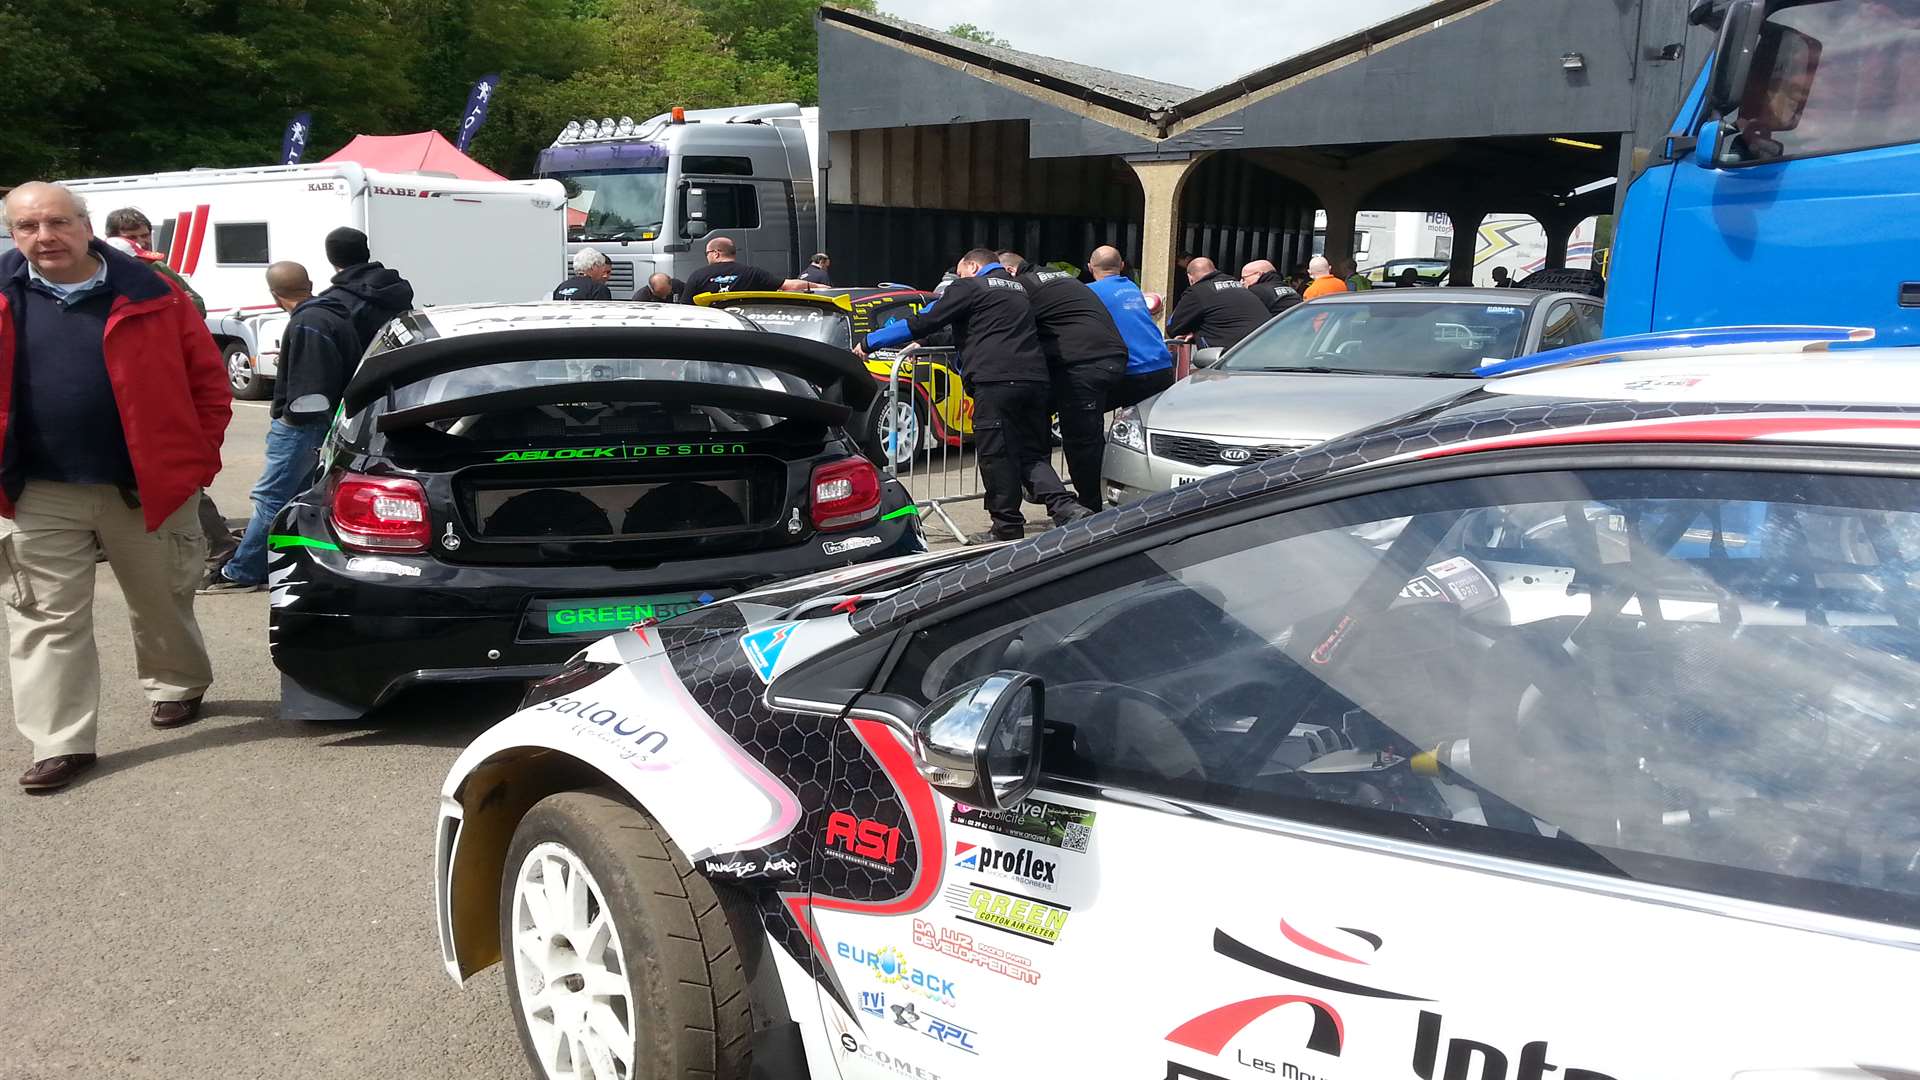 The scrutineering bay was a very busy place